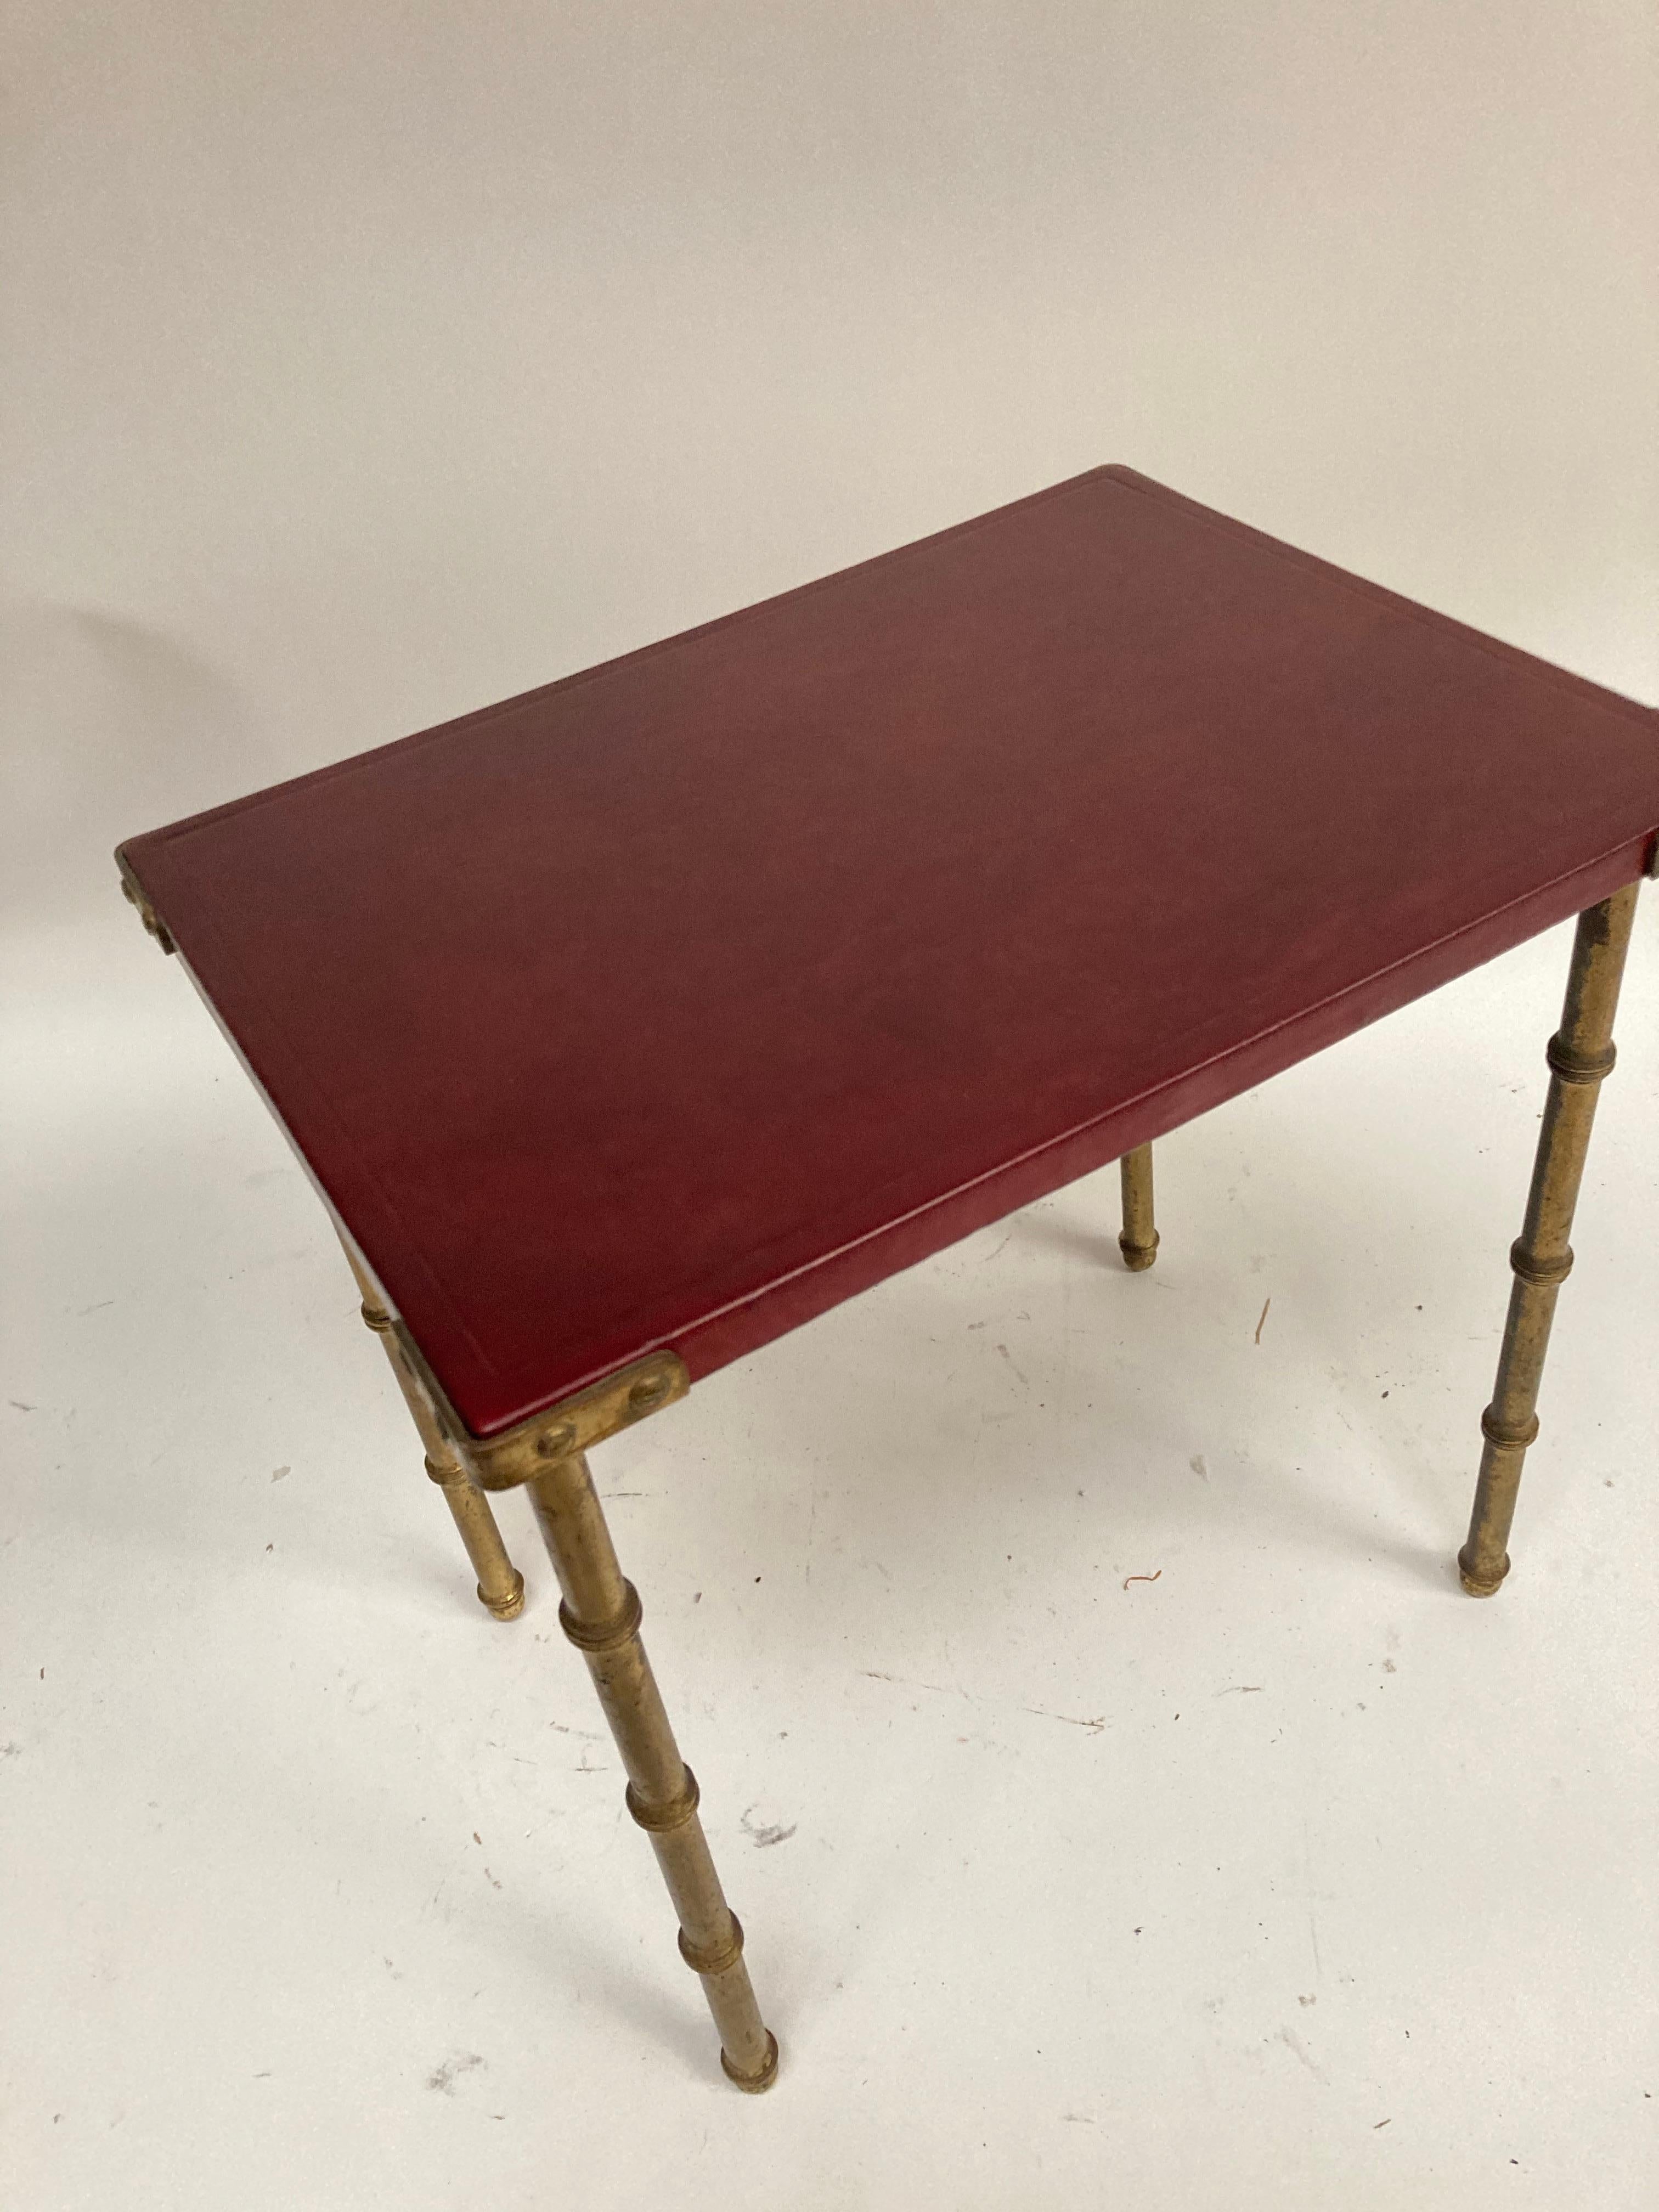 1950's table with burgundy leather top, and brass bambou feet by Jacques Adnet
France.